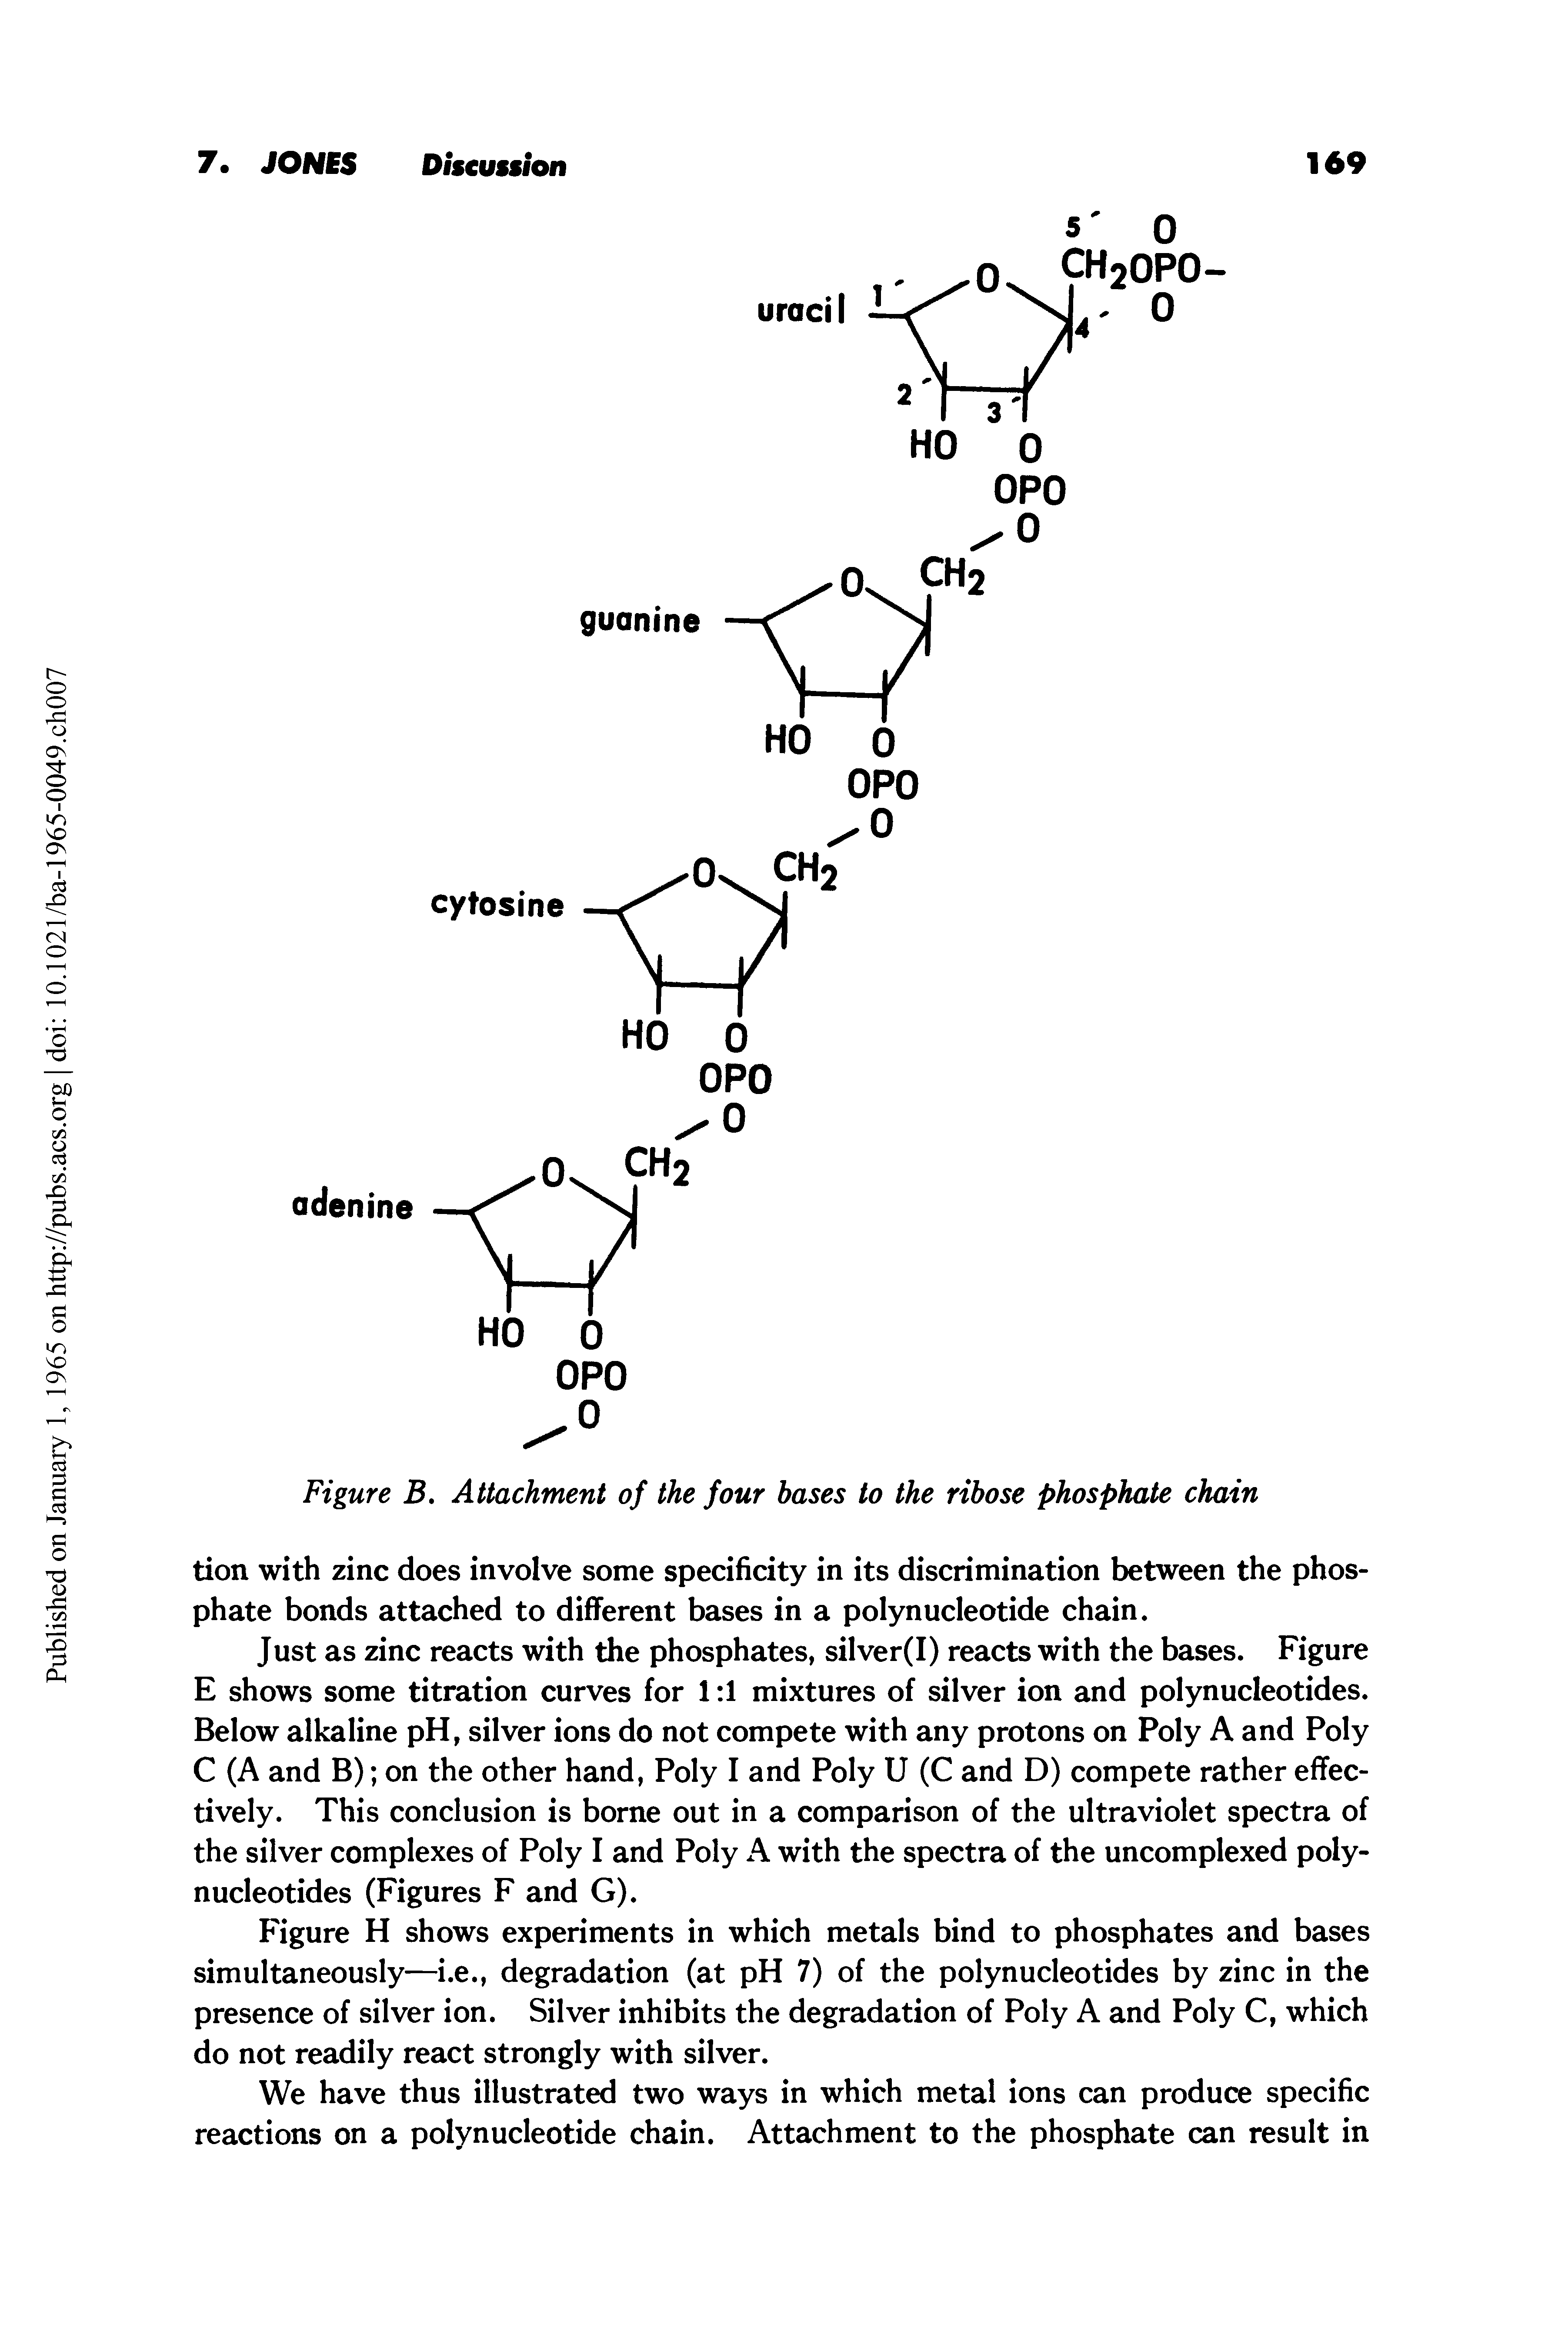 Figure H shows experiments in which metals bind to phosphates and bases simultaneously—i.e., degradation (at pH 7) of the polynucleotides by zinc in the presence of silver ion. Silver inhibits the degradation of Poly A and Poly C, which do not readily react strongly with silver.